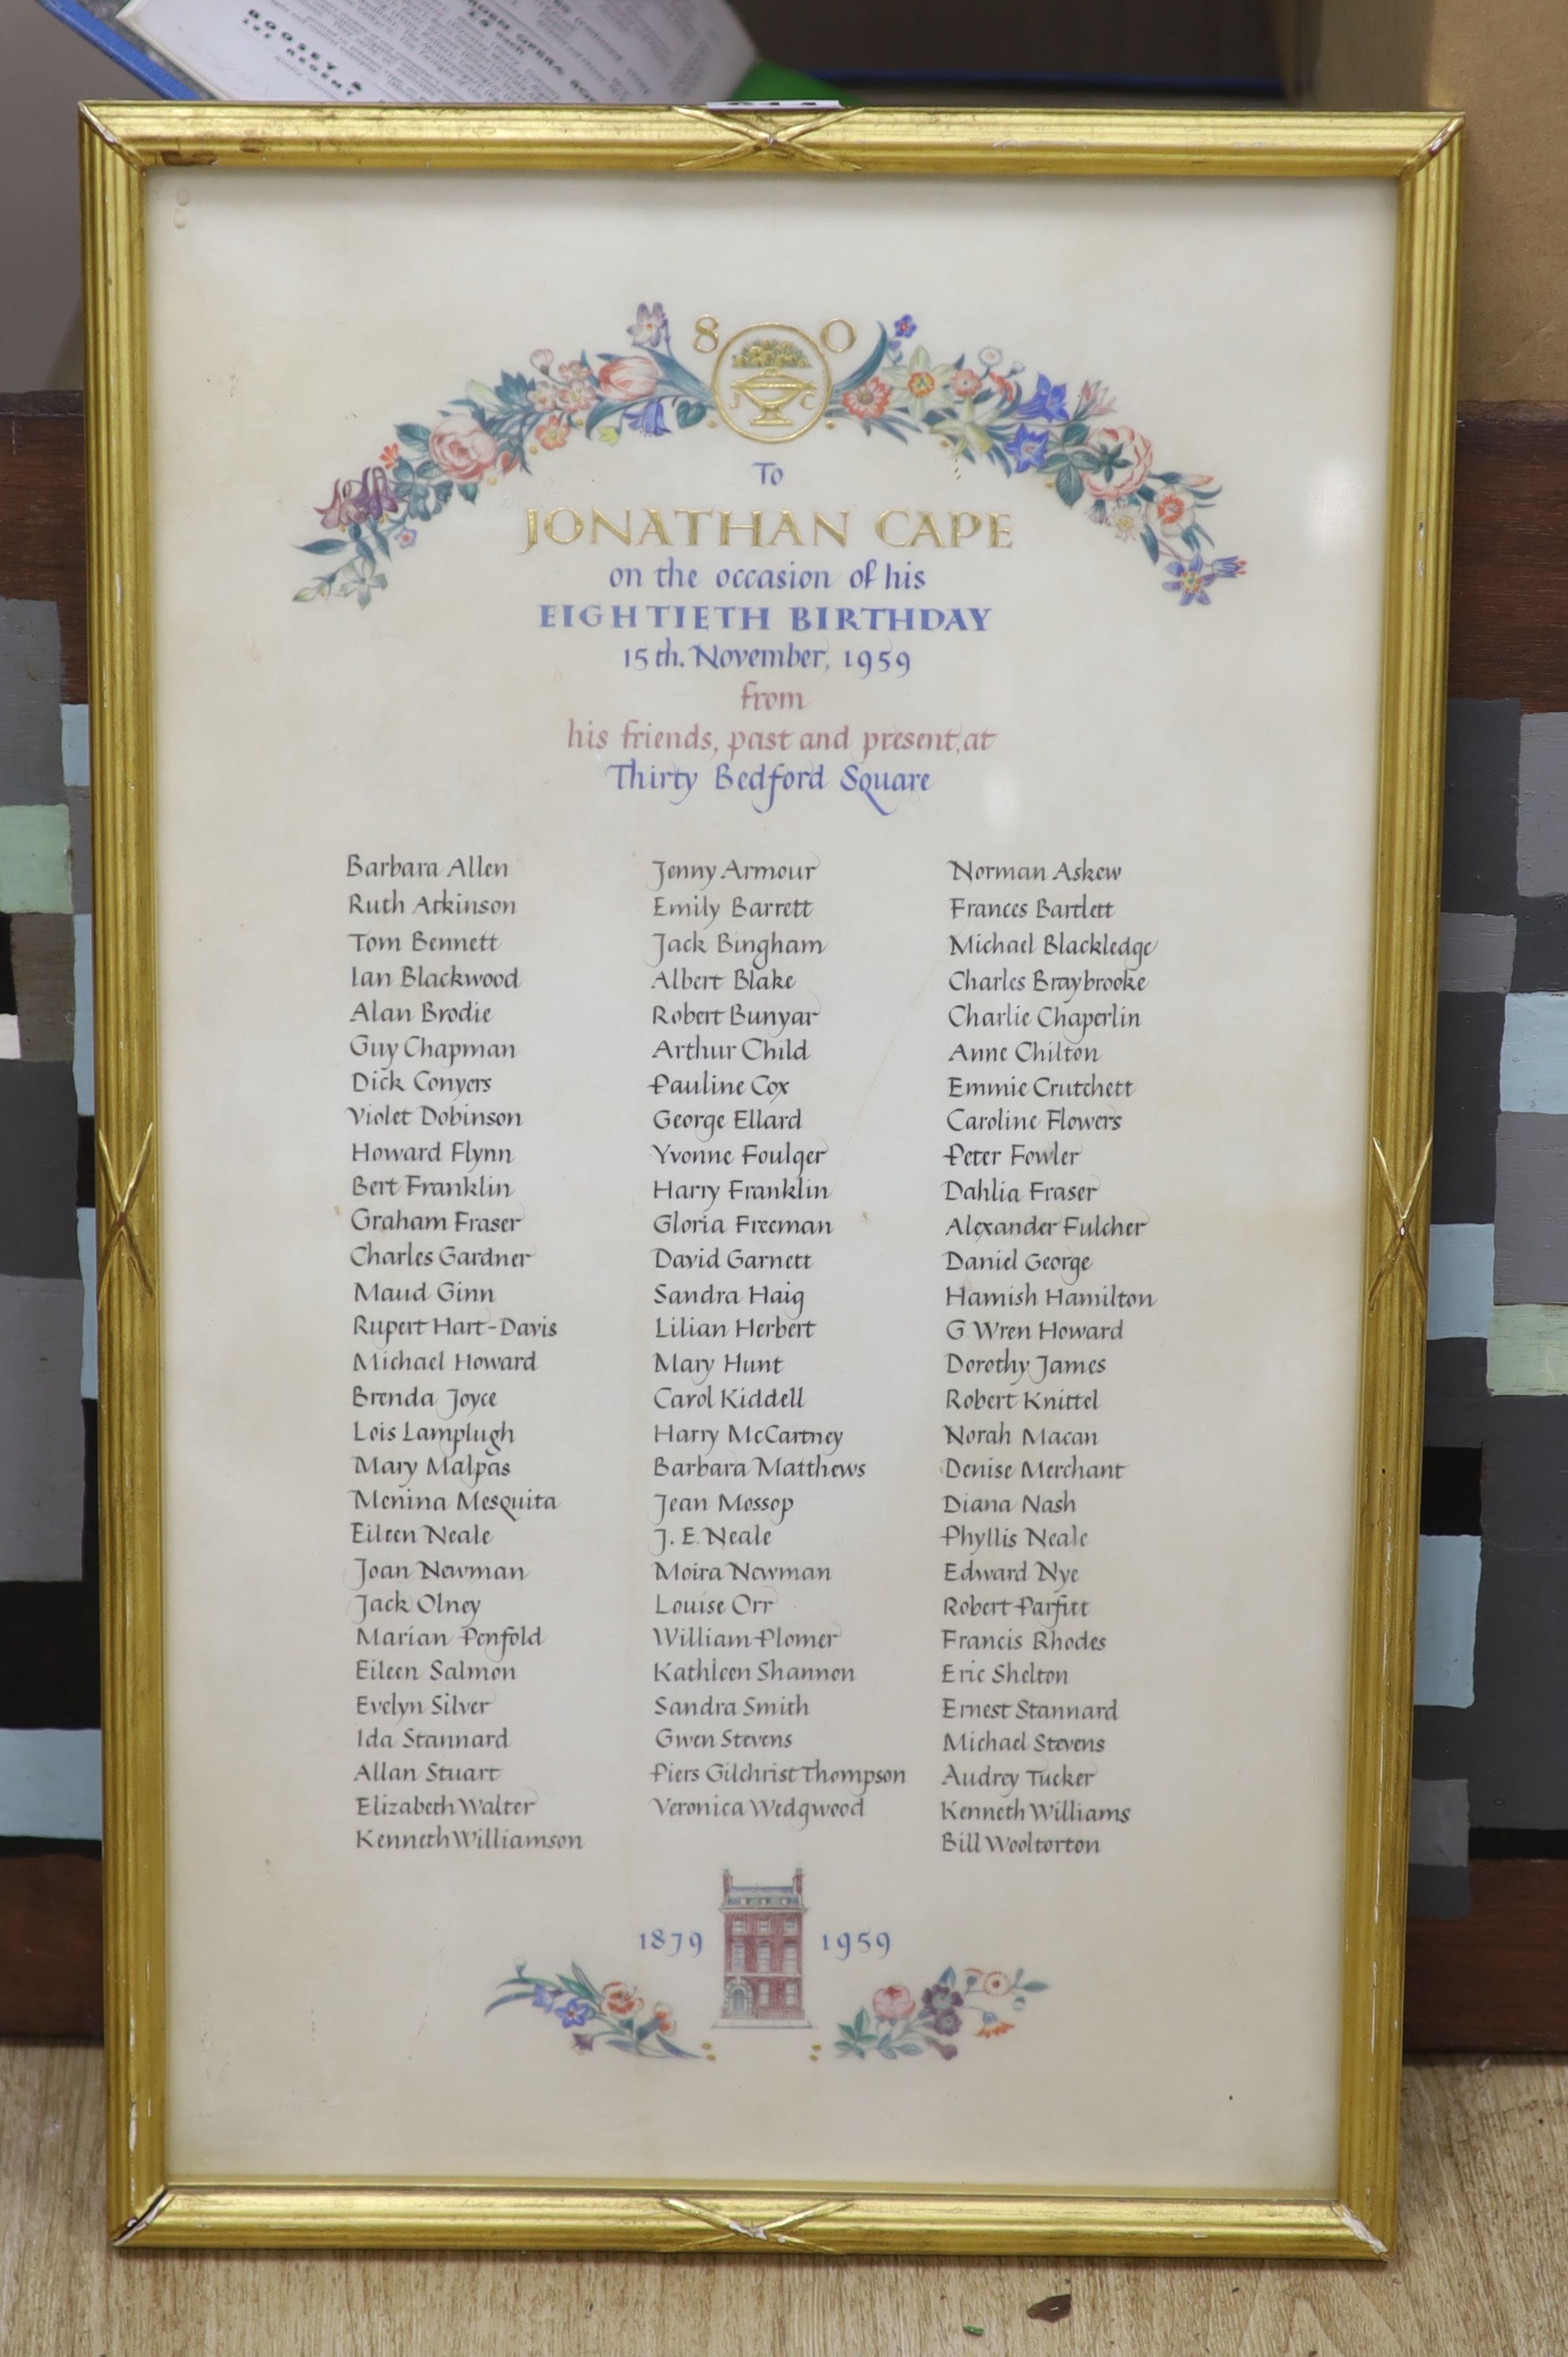 An illuminated manuscript for Jonathan Cape's 80th birthday with list of all members of staff at the time, 50 x 29cm